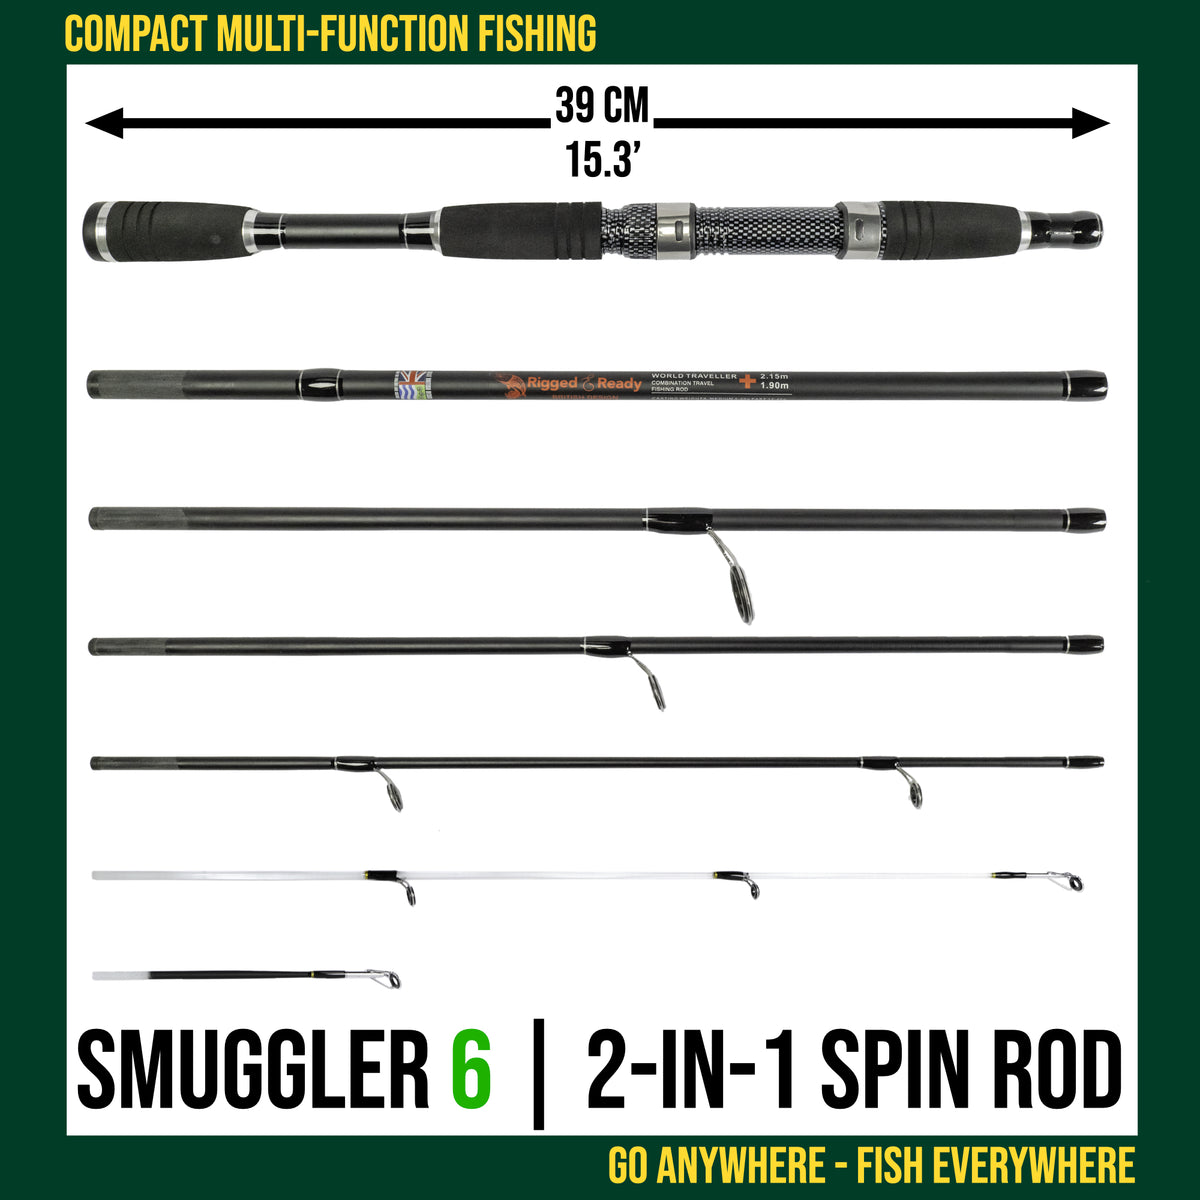 Smuggler 6 215+190cm Compact Travel Fishing Rod + 2 tips – Rigged